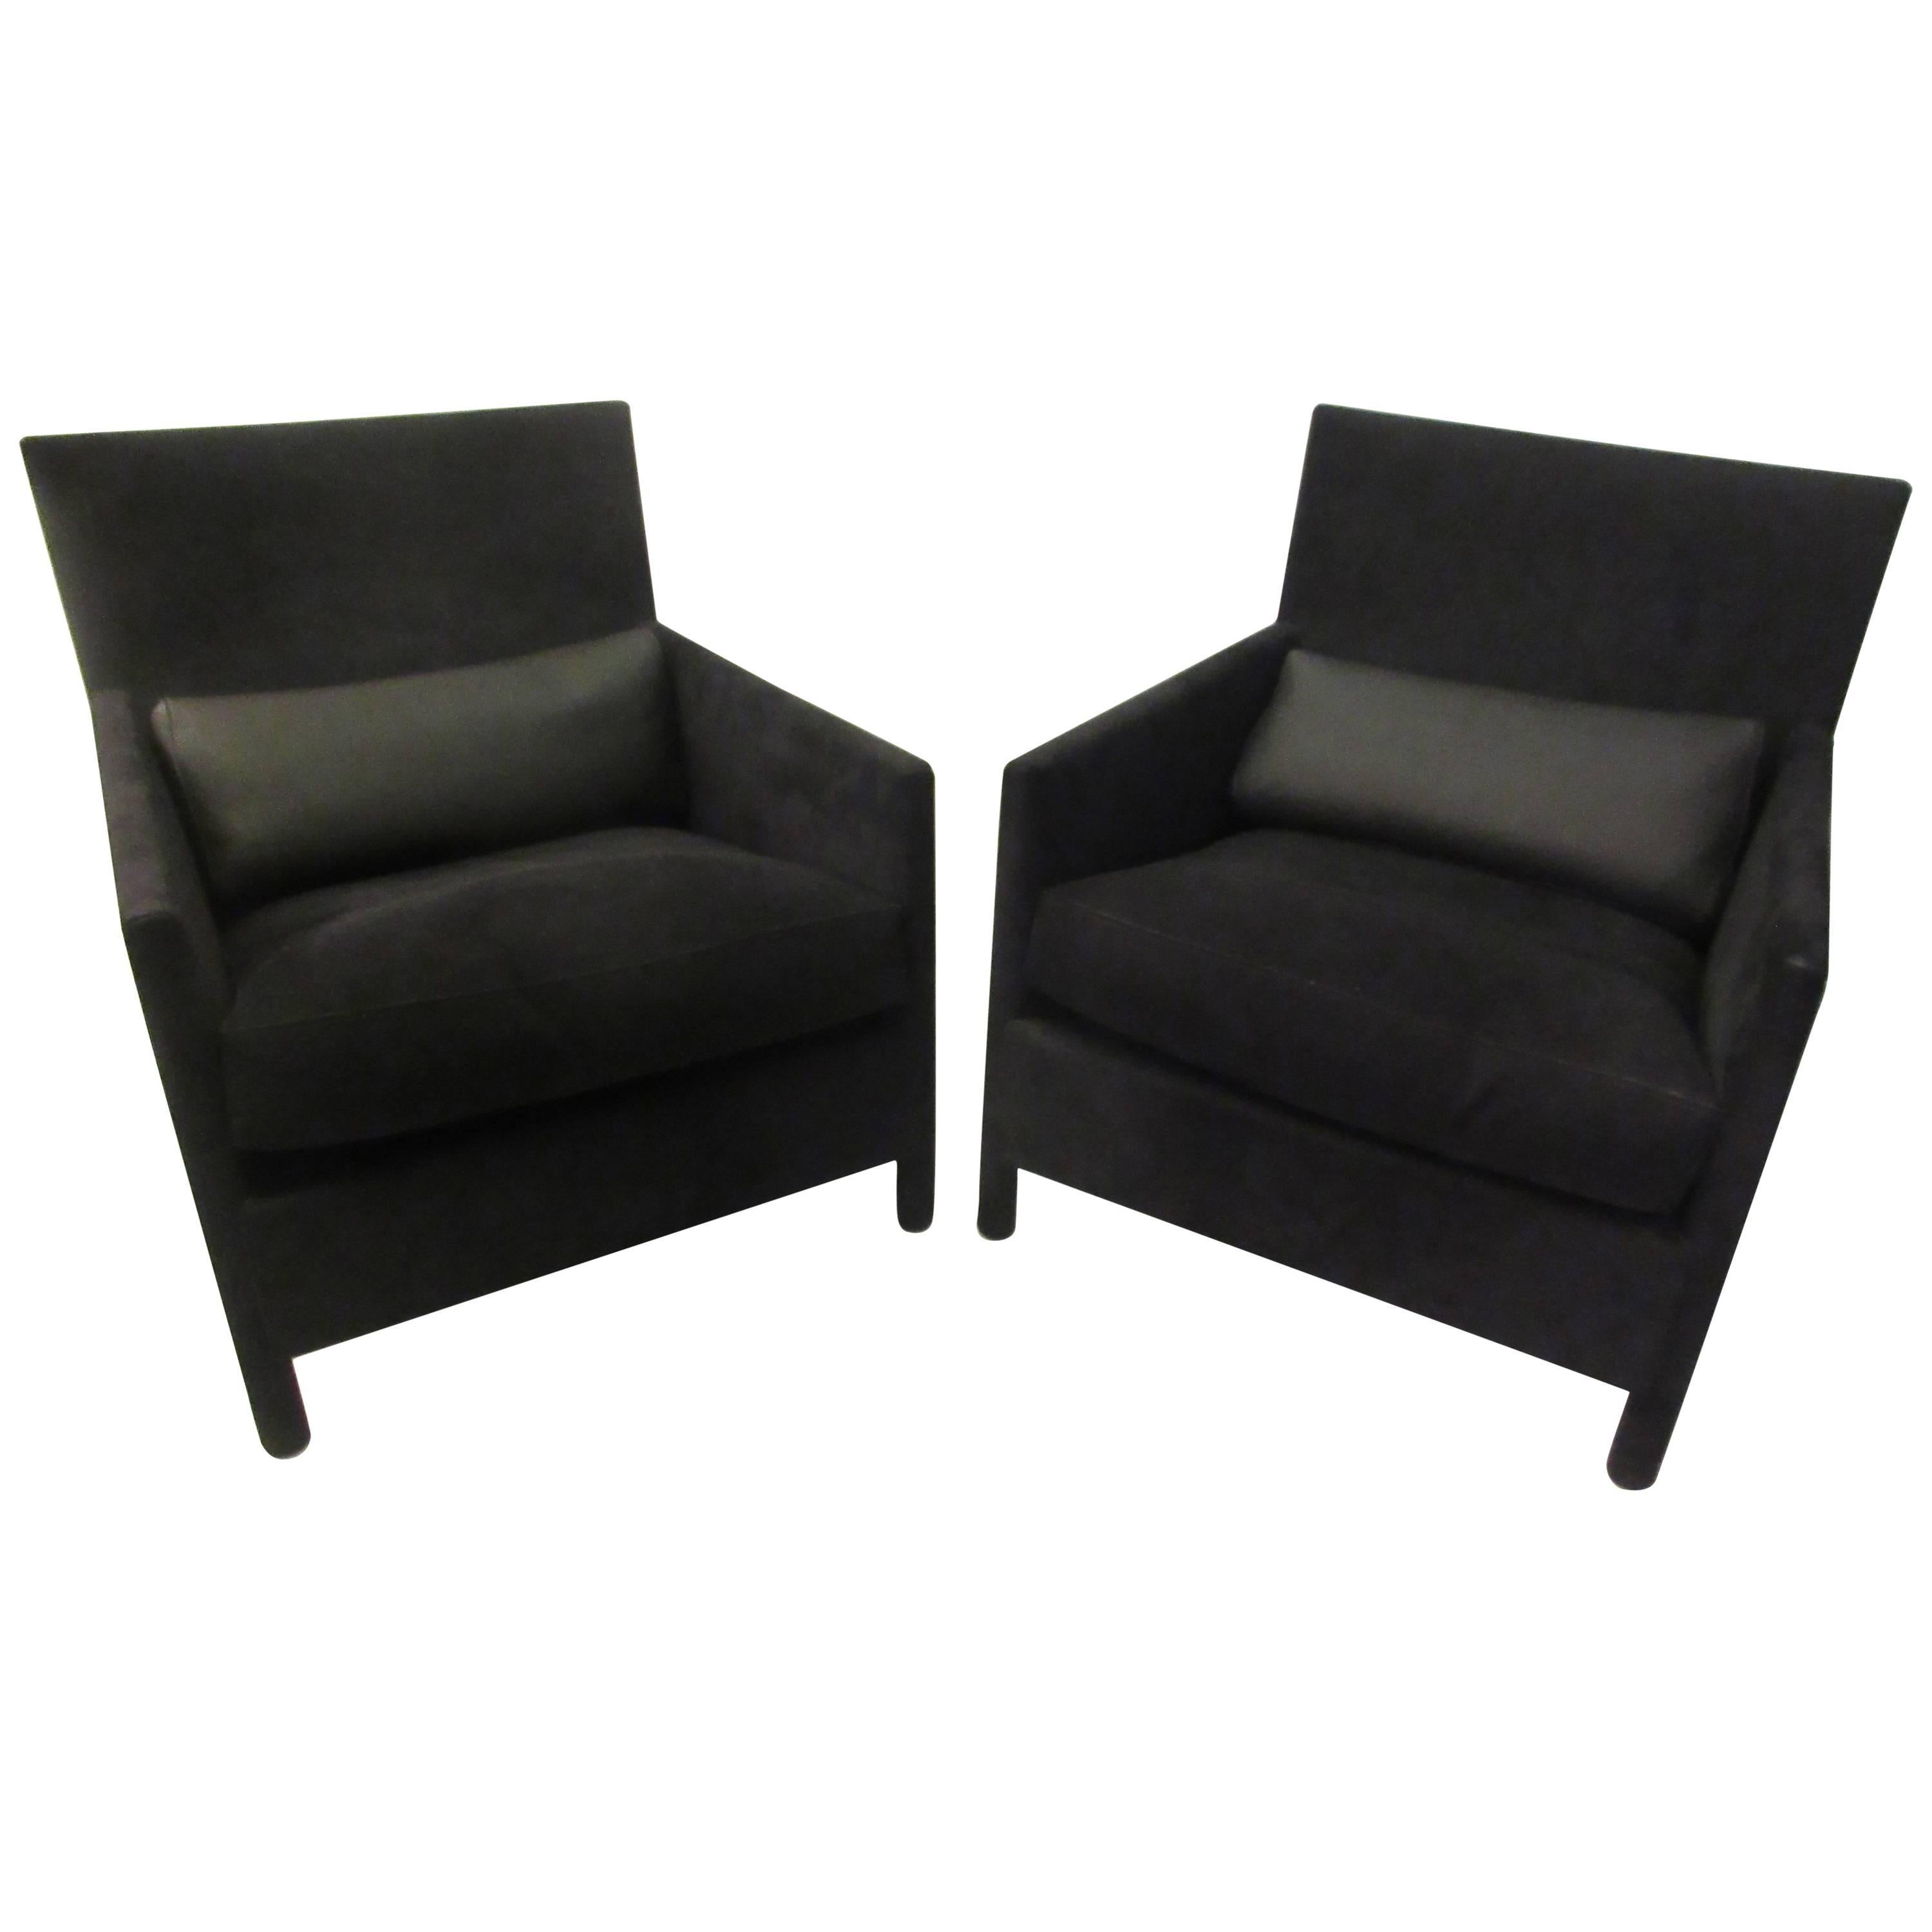 Molteni & C Leather Armchairs in Charcoal Suede